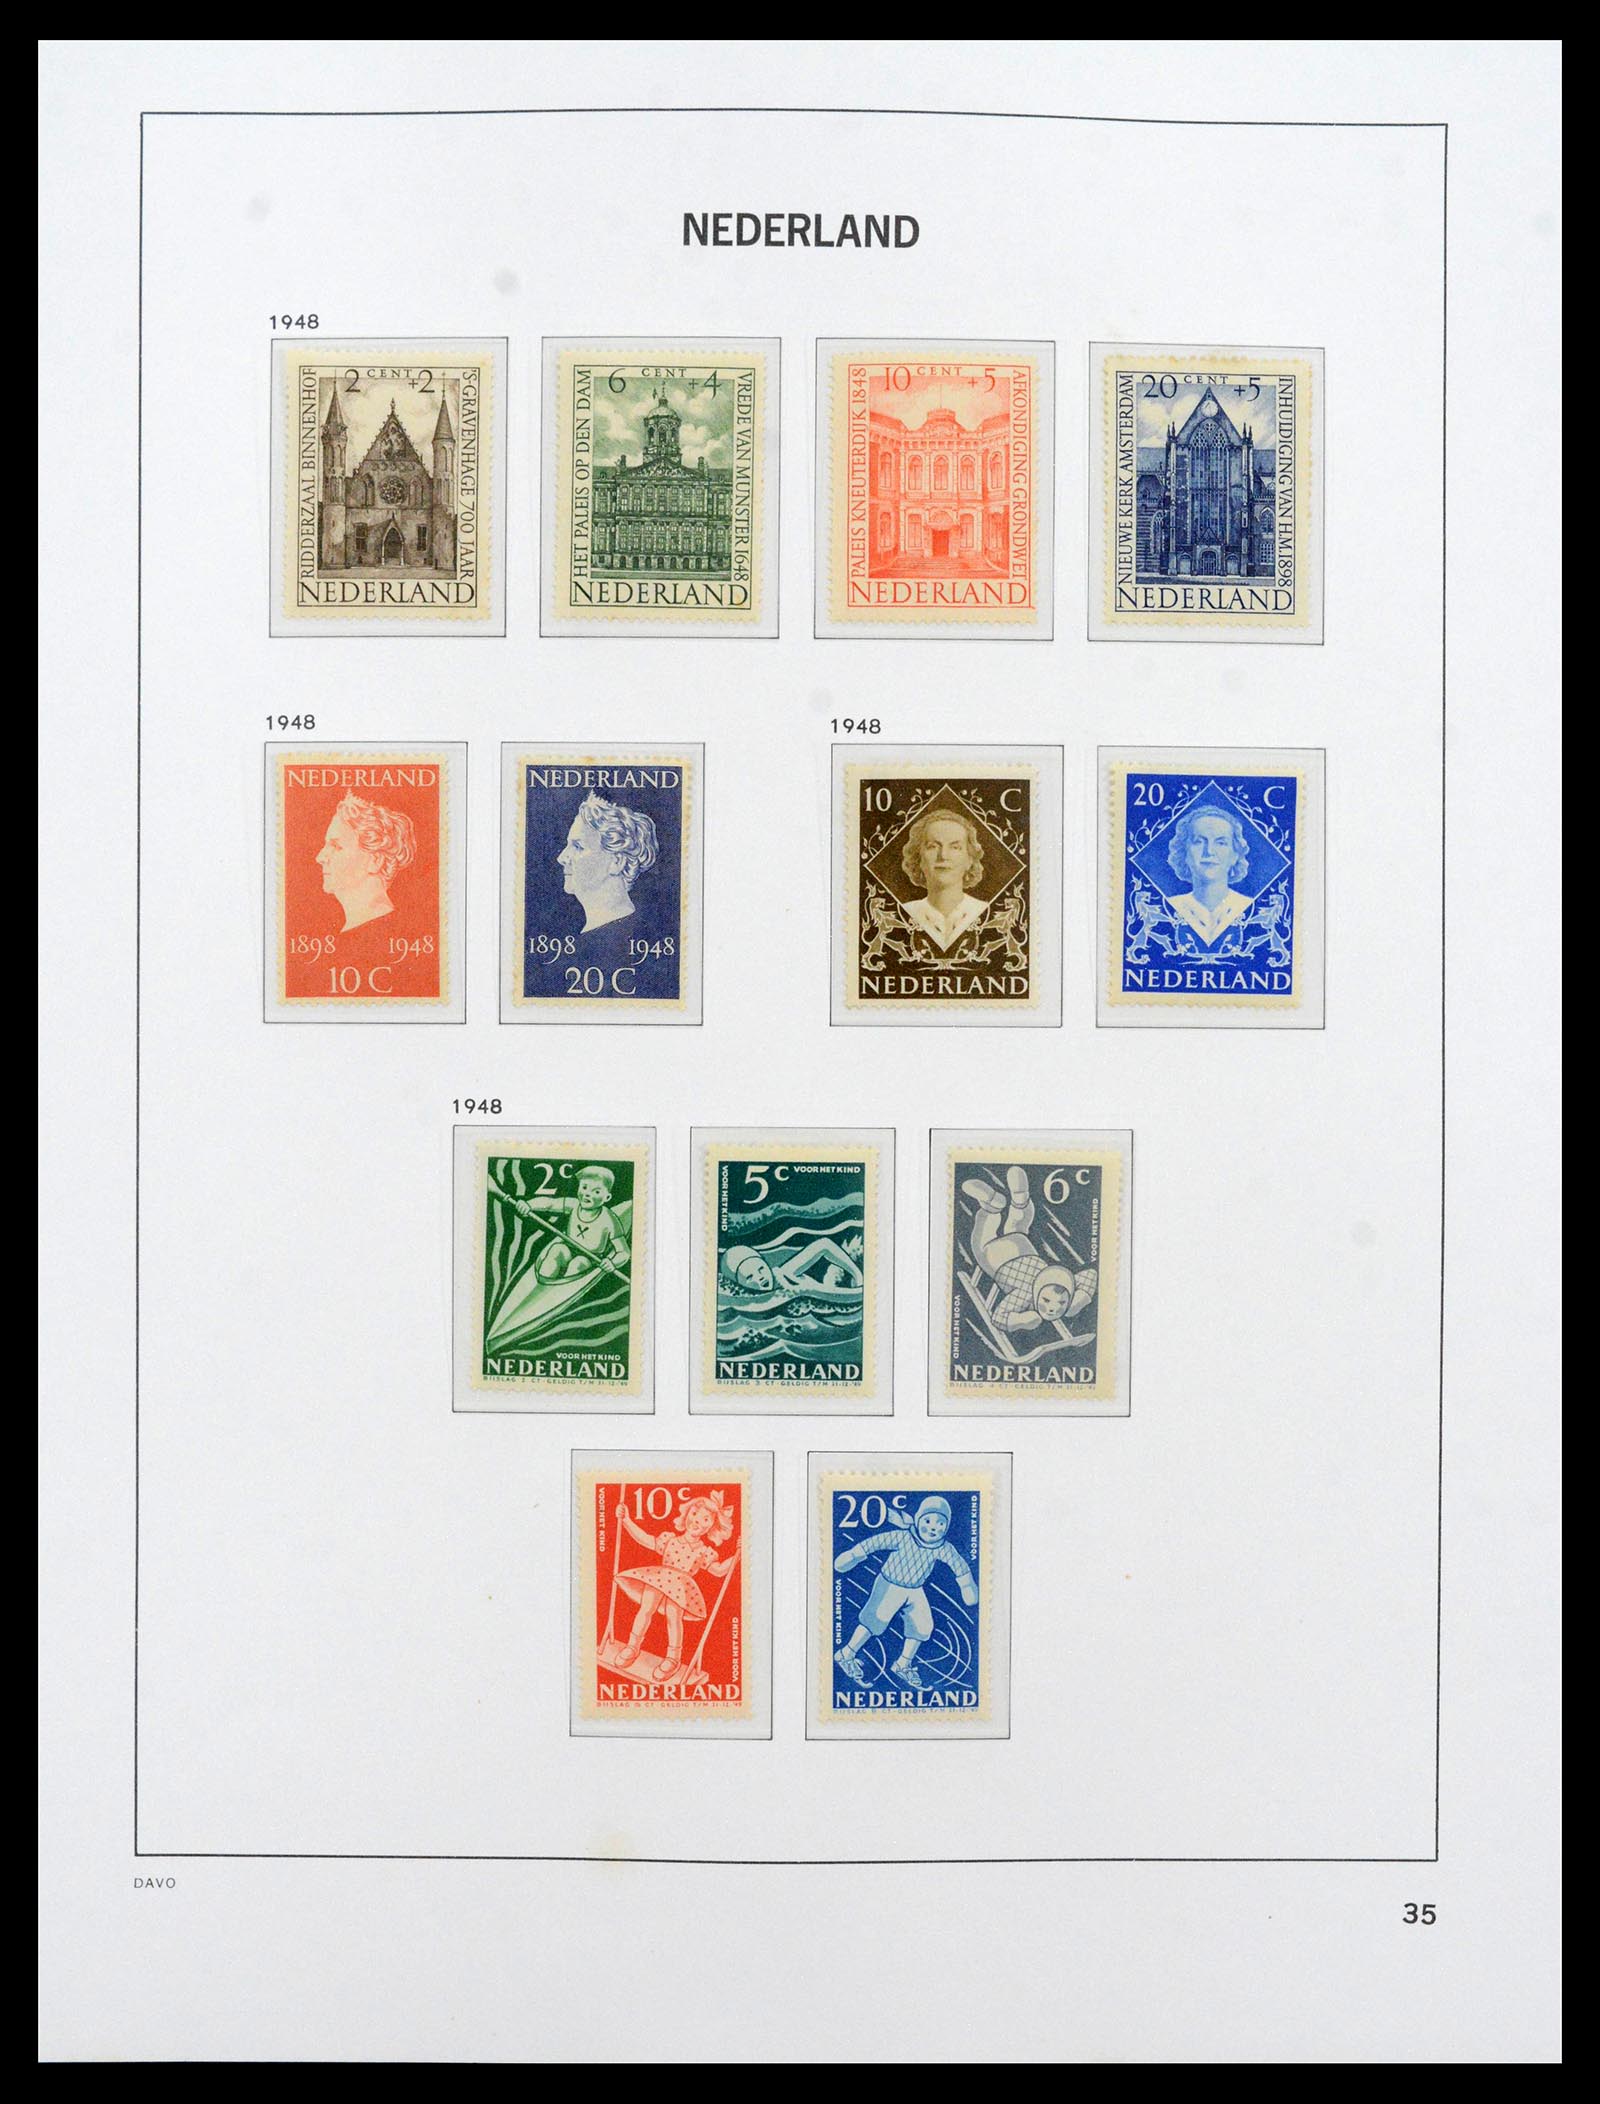 39035 0054 - Stamp collection 39035 Netherlands 1852-1968.